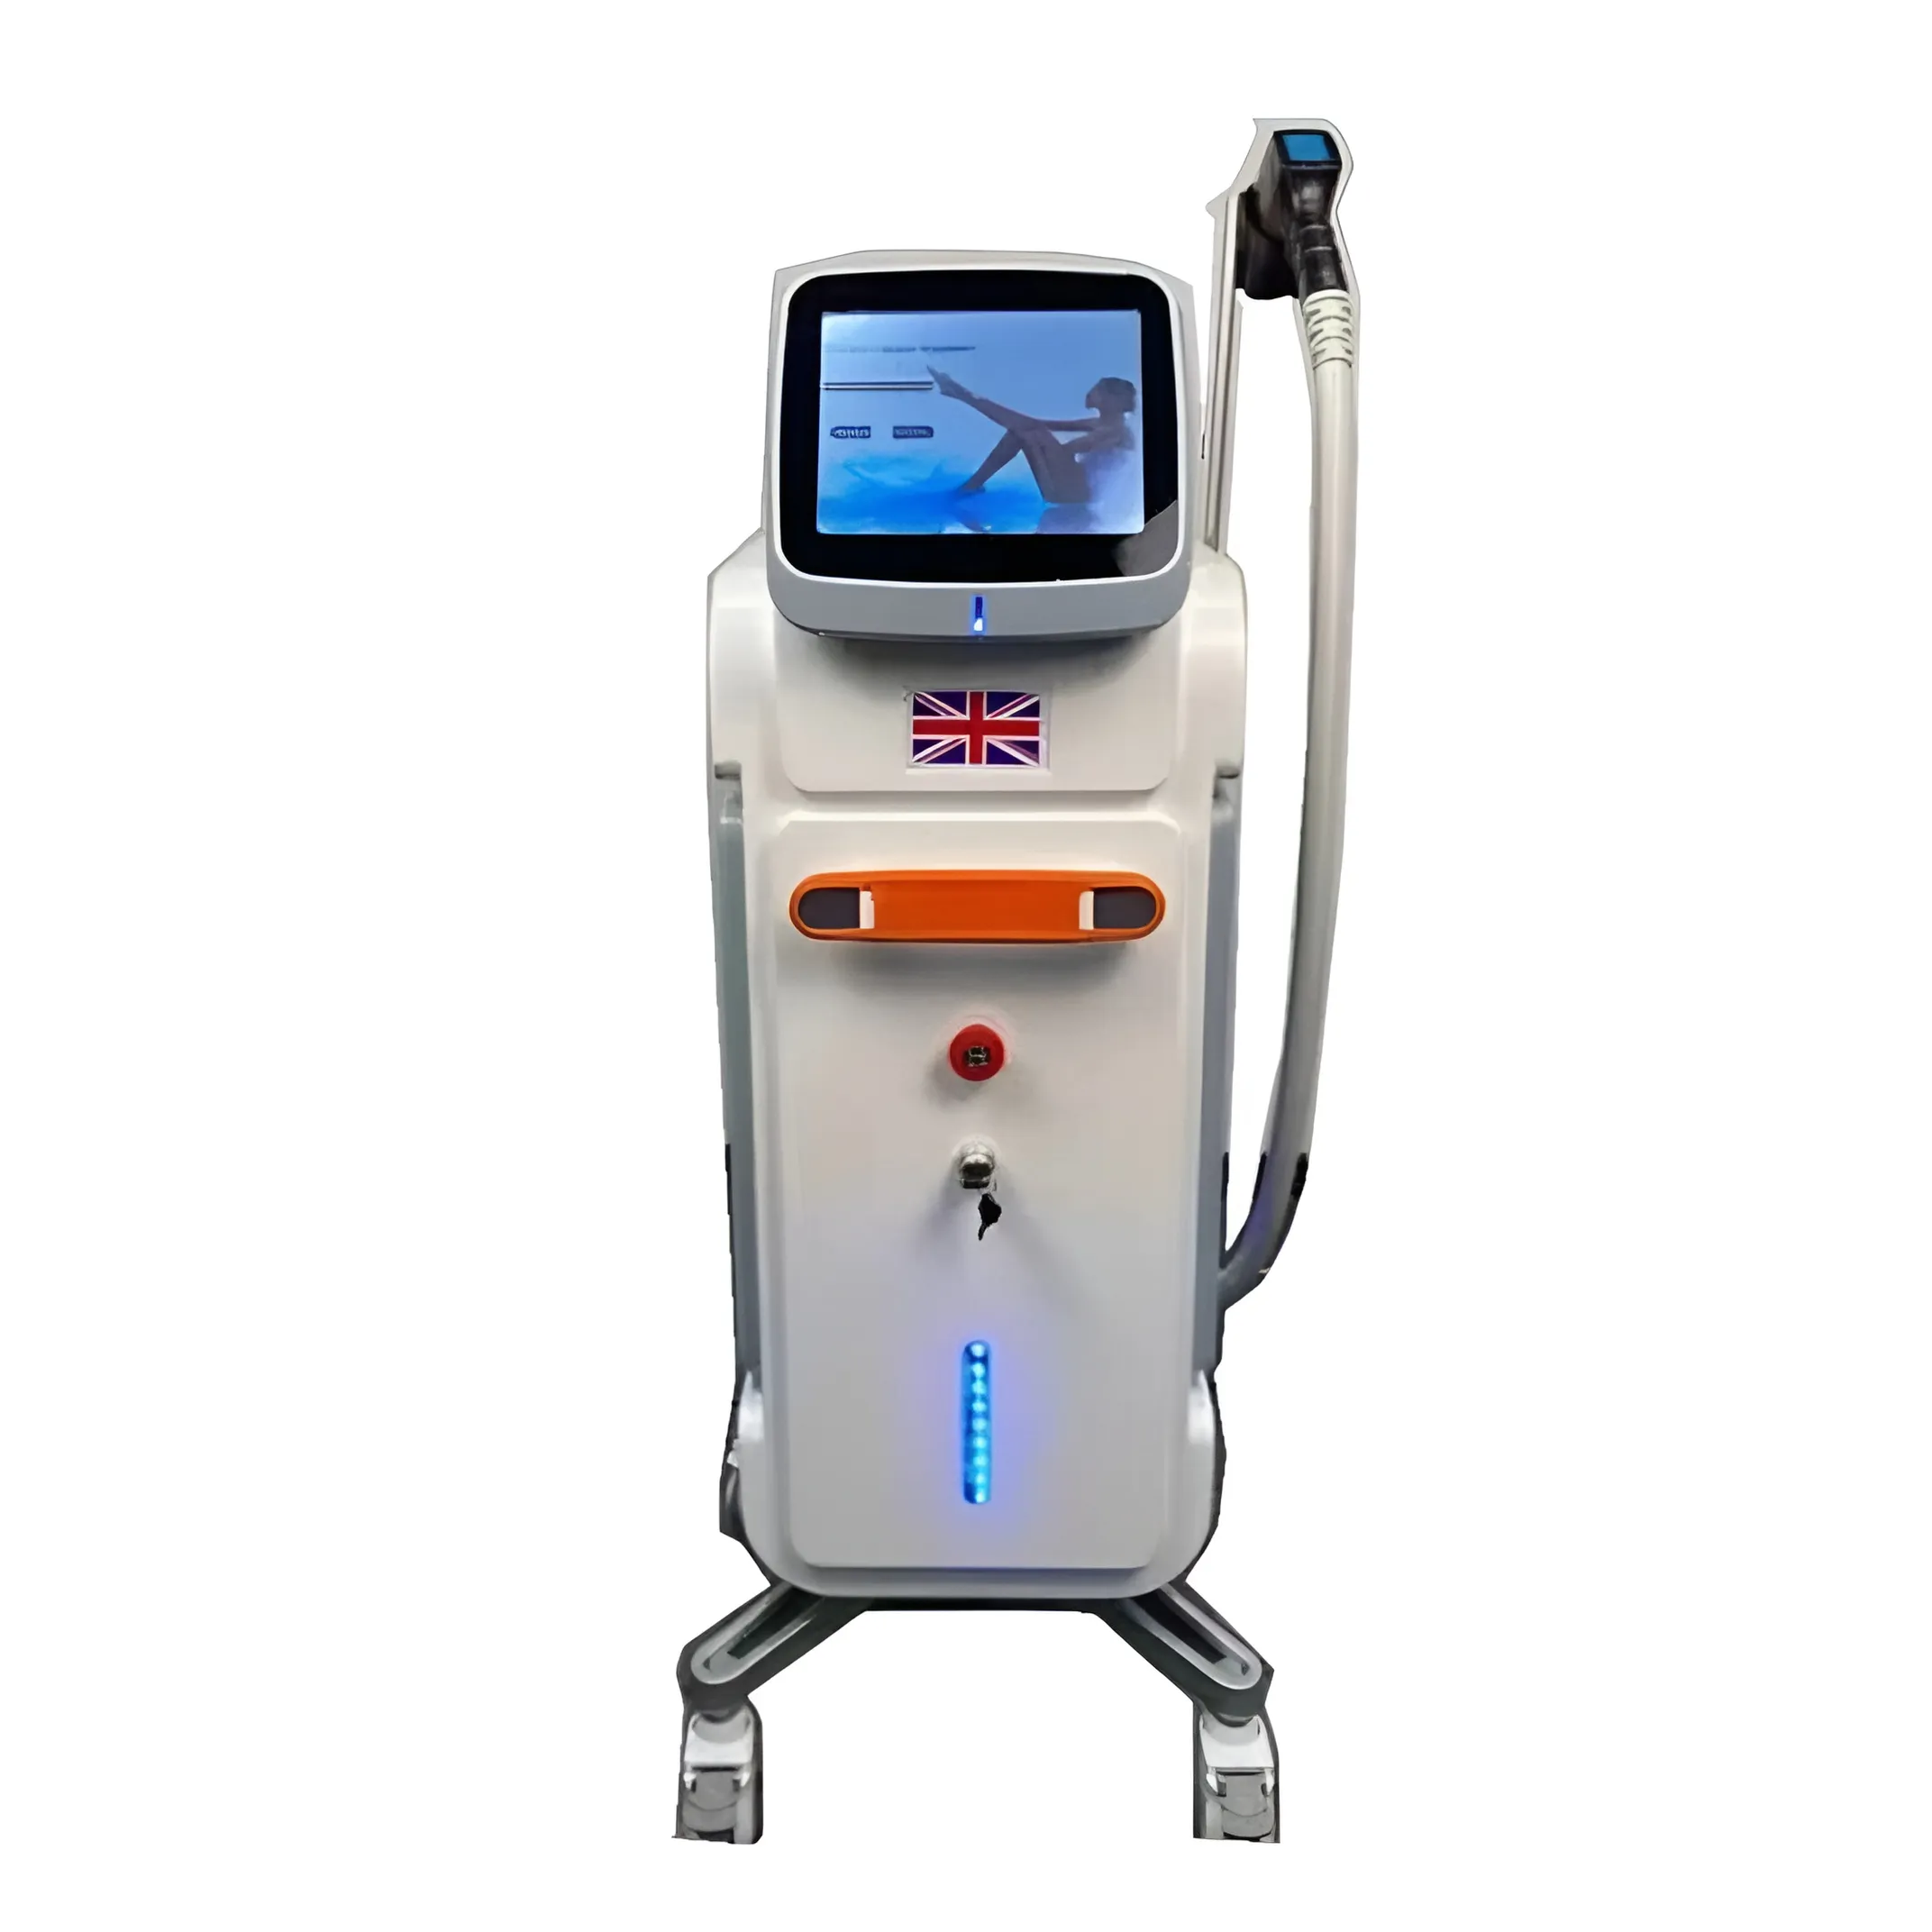 China Professional 810nm diode laser hair removal 808 diode laser hair  removal equipment Manufacturer and Supplier